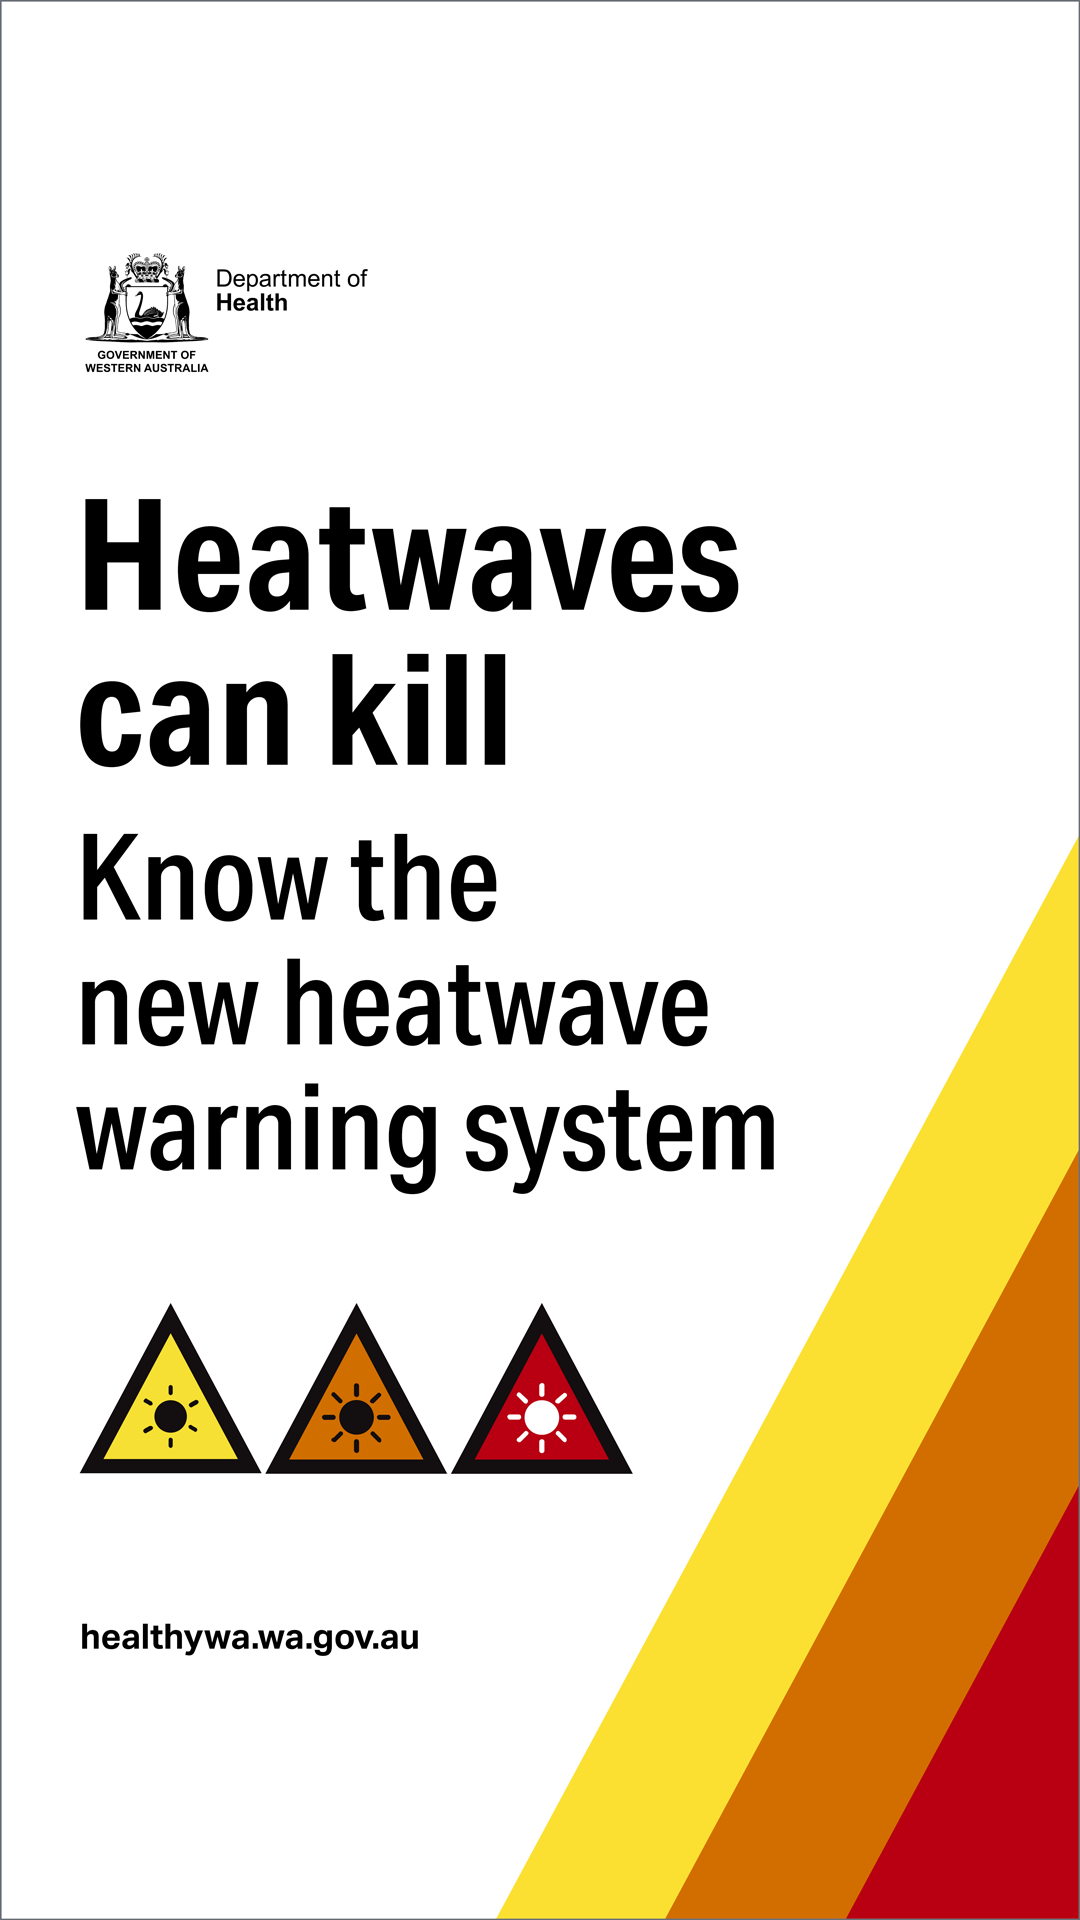 Heatwaves can kill – Know the new heatwave warning system